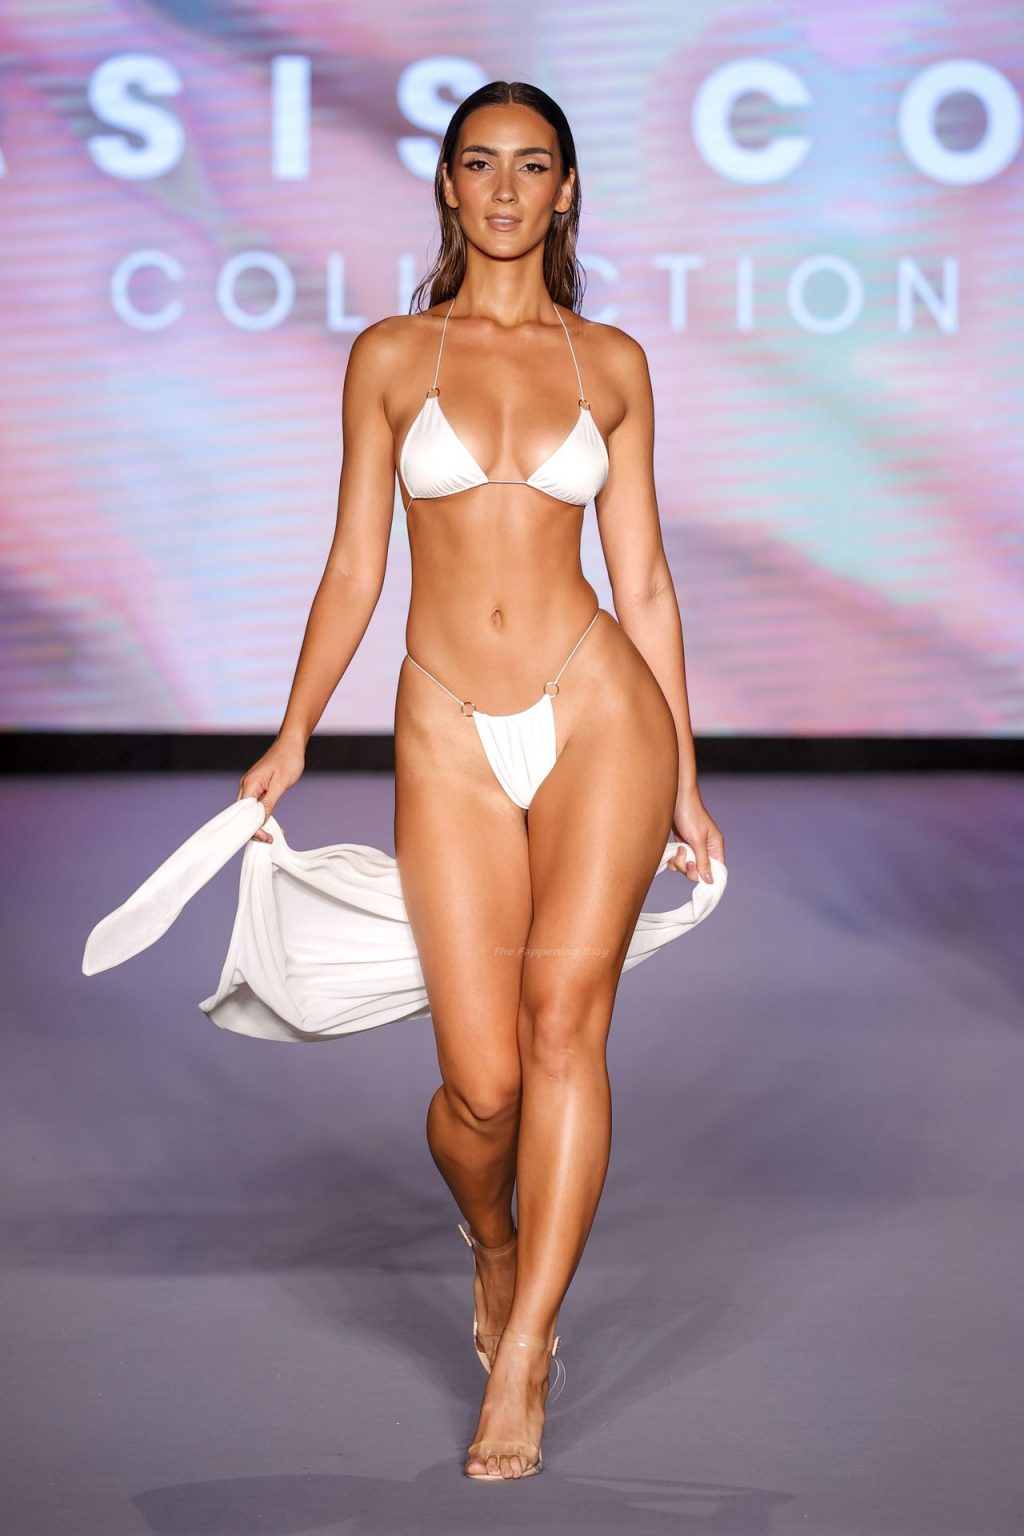 Priscilla Ricart Shows Off Her Fit Body at the Oh Polly Bikini Show (37 Pho...